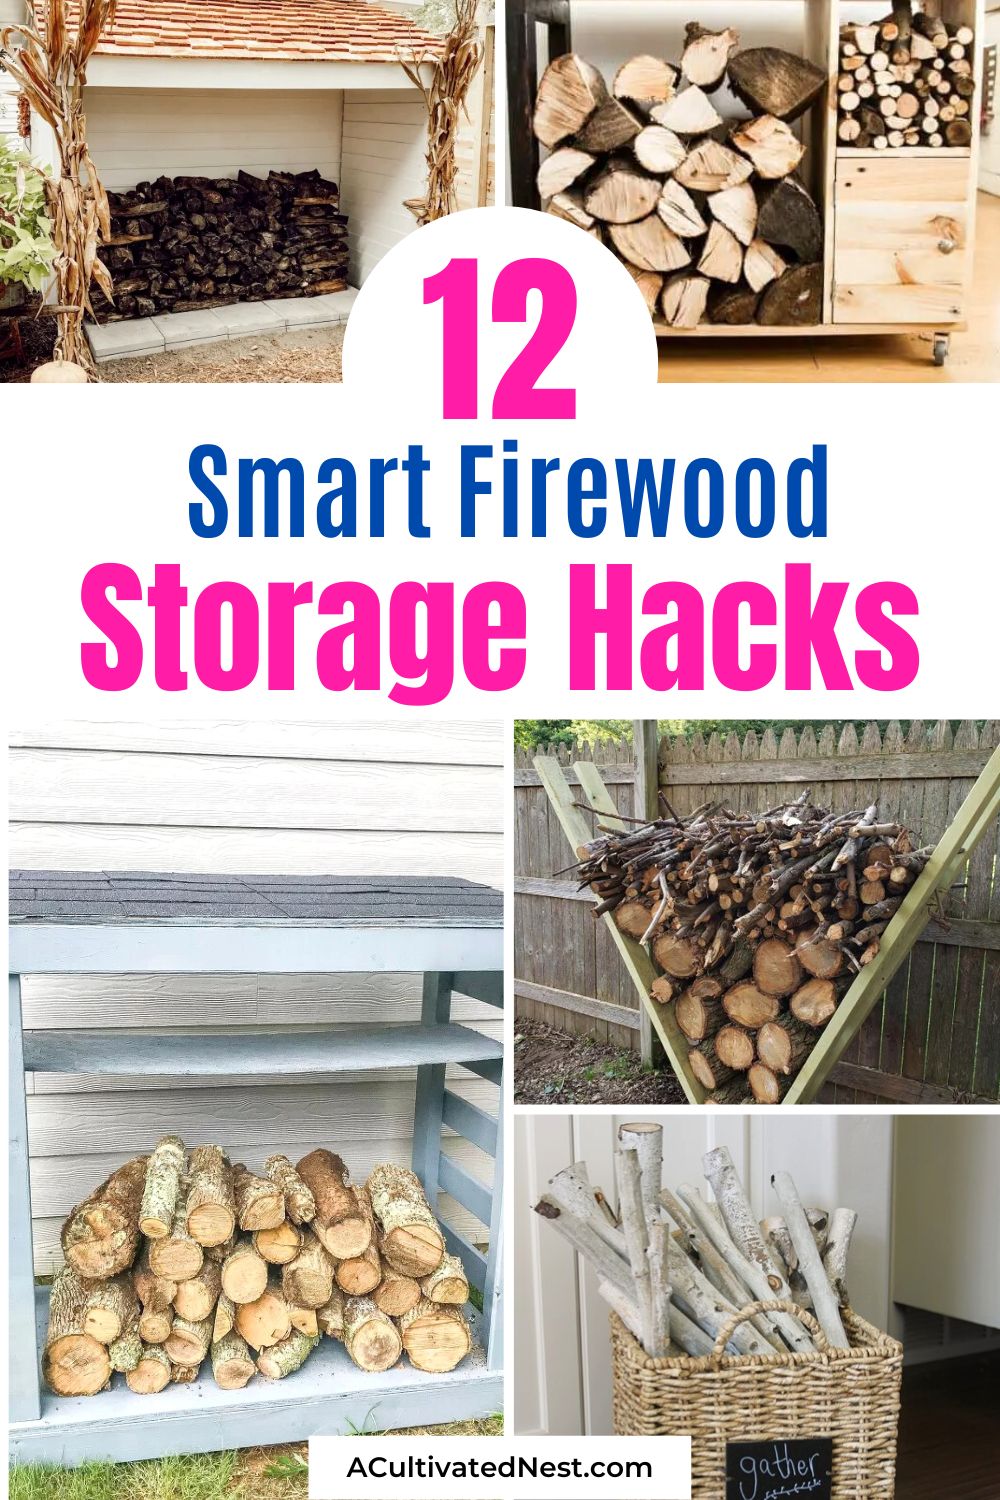 12 Smart Firewood Storage Hacks- Do you need a simple solution to store your firewood this winter? Check out these smart firewood storage hacks to make your life easier and get your firewood organized! | firewood organization ideas, #firewood #storageIdeas #organize #homeOrganization #ACultivatedNest